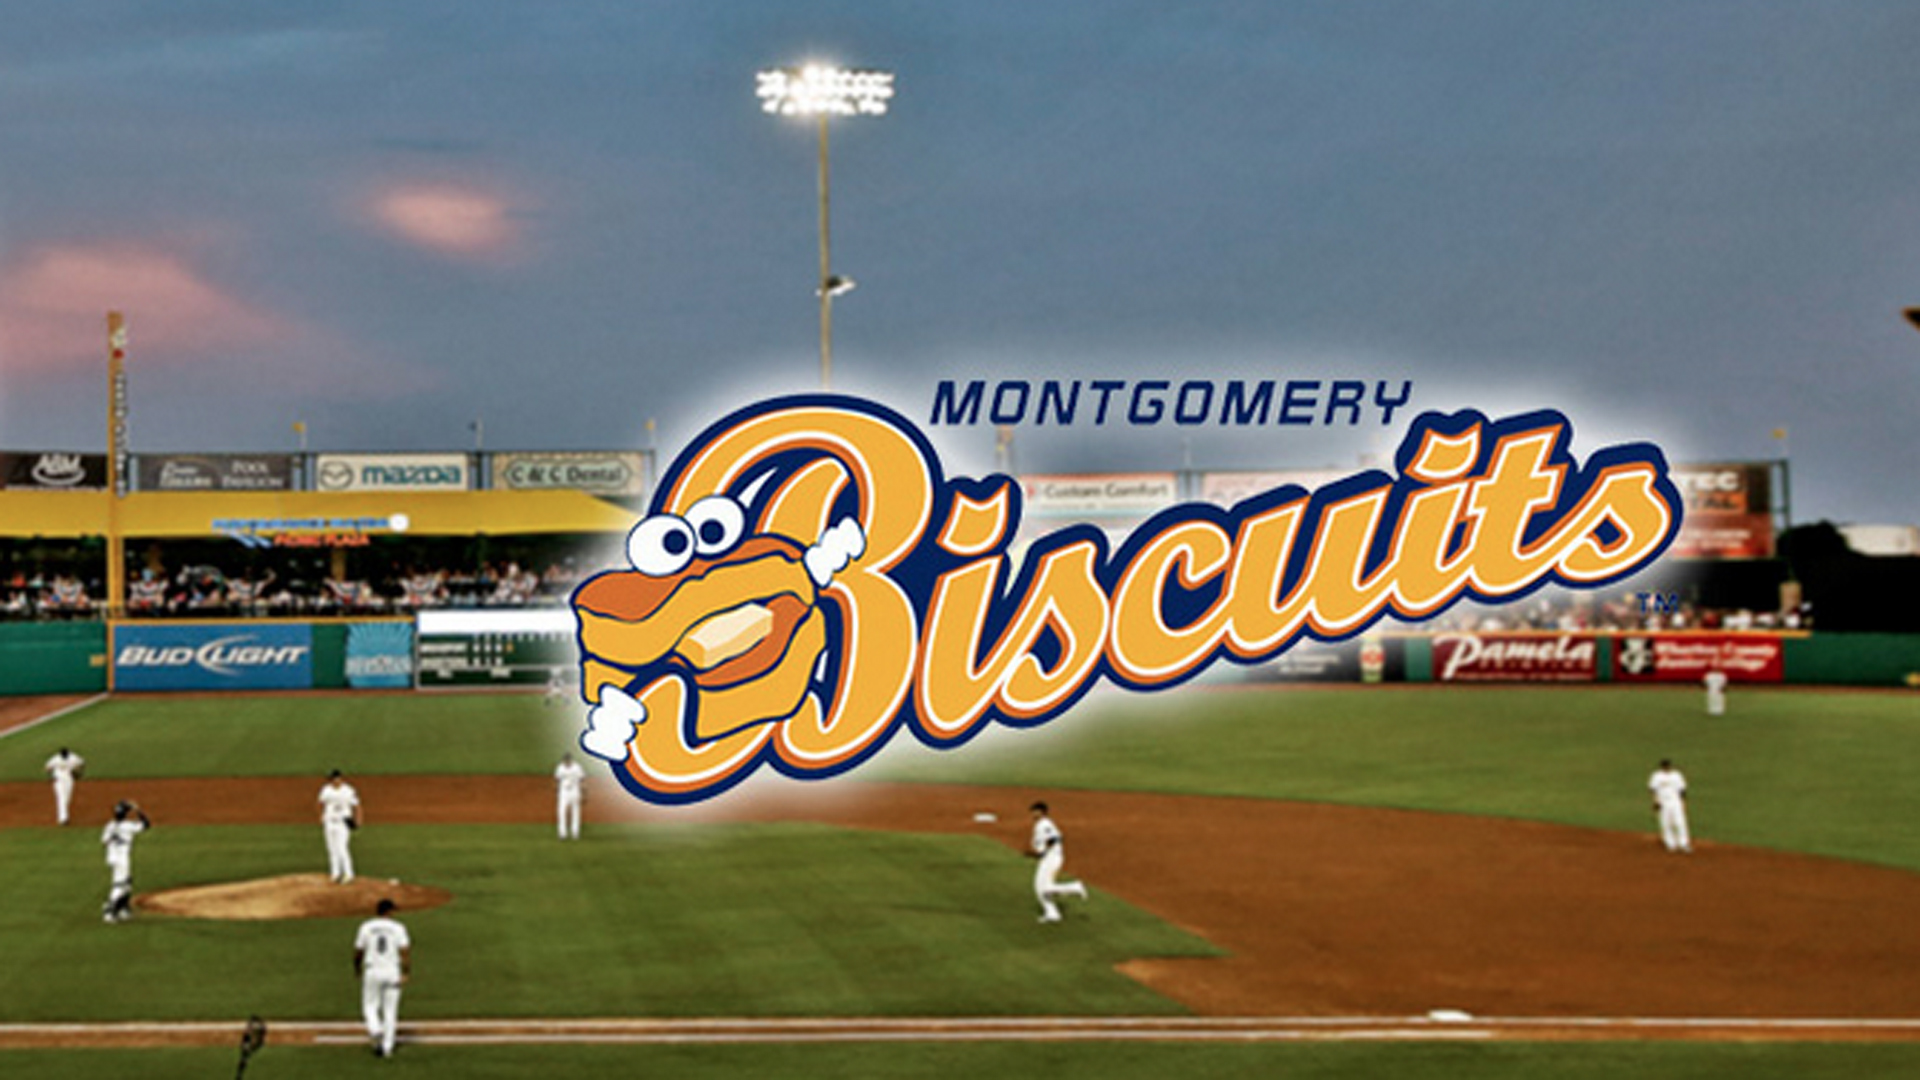 Montgomery Biscuits take title in Sporting News' Minor League team name